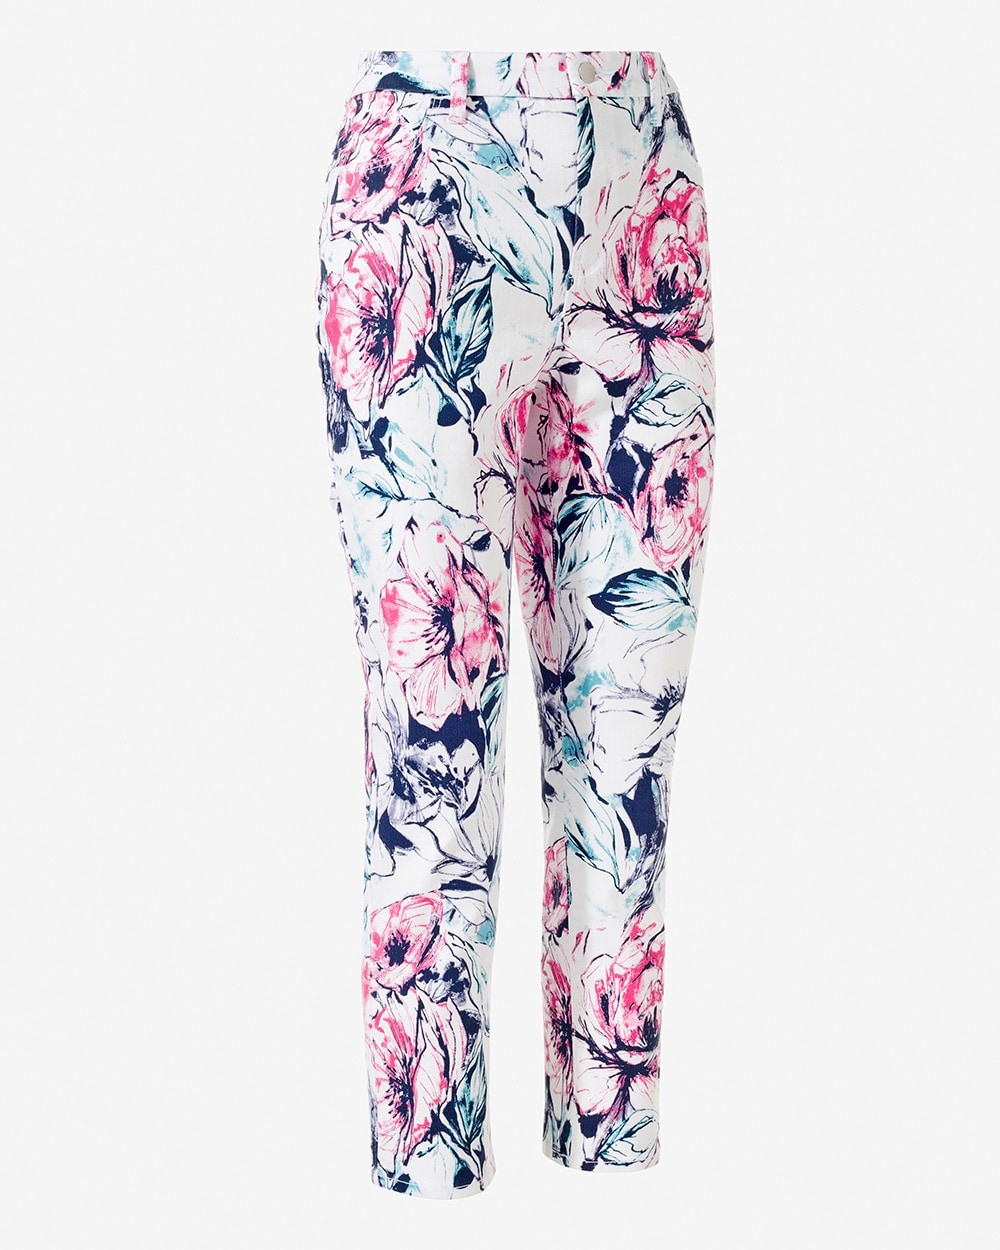 Drawn Floral Girlfriend Ankle Jeans